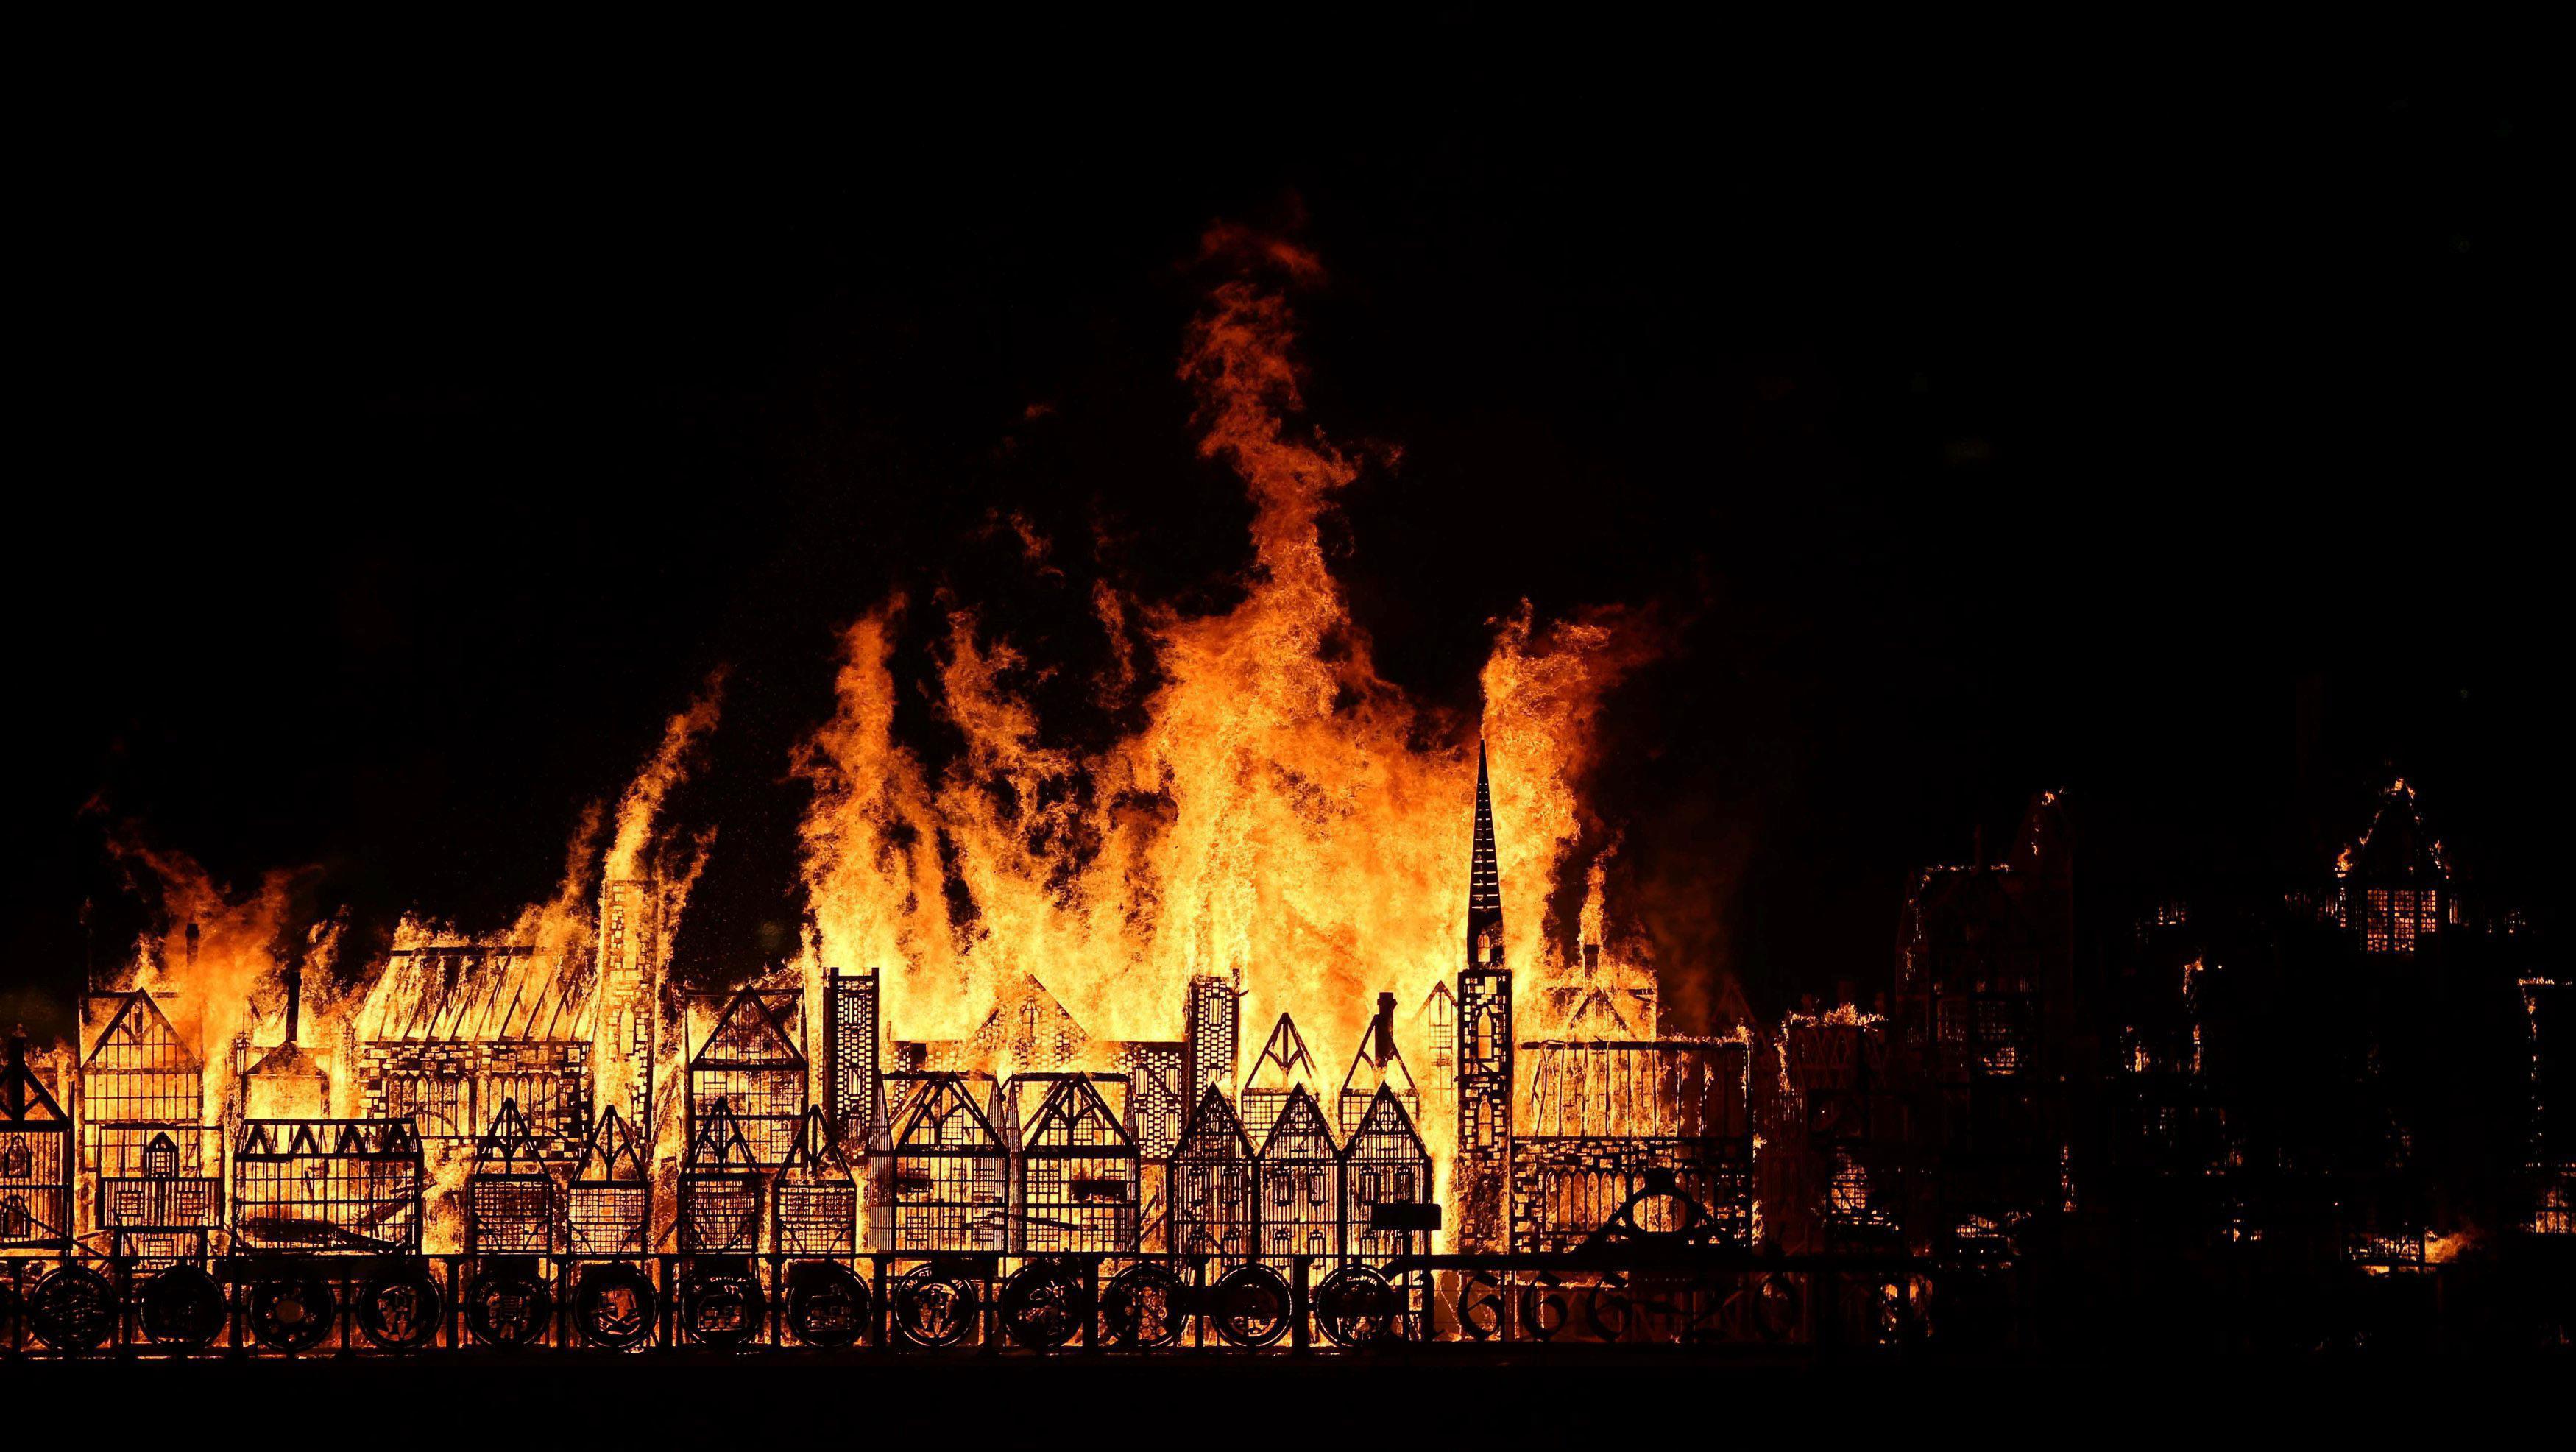 A 120-meter long model of the 17th century London skyline is set alight on the River Thames to comme